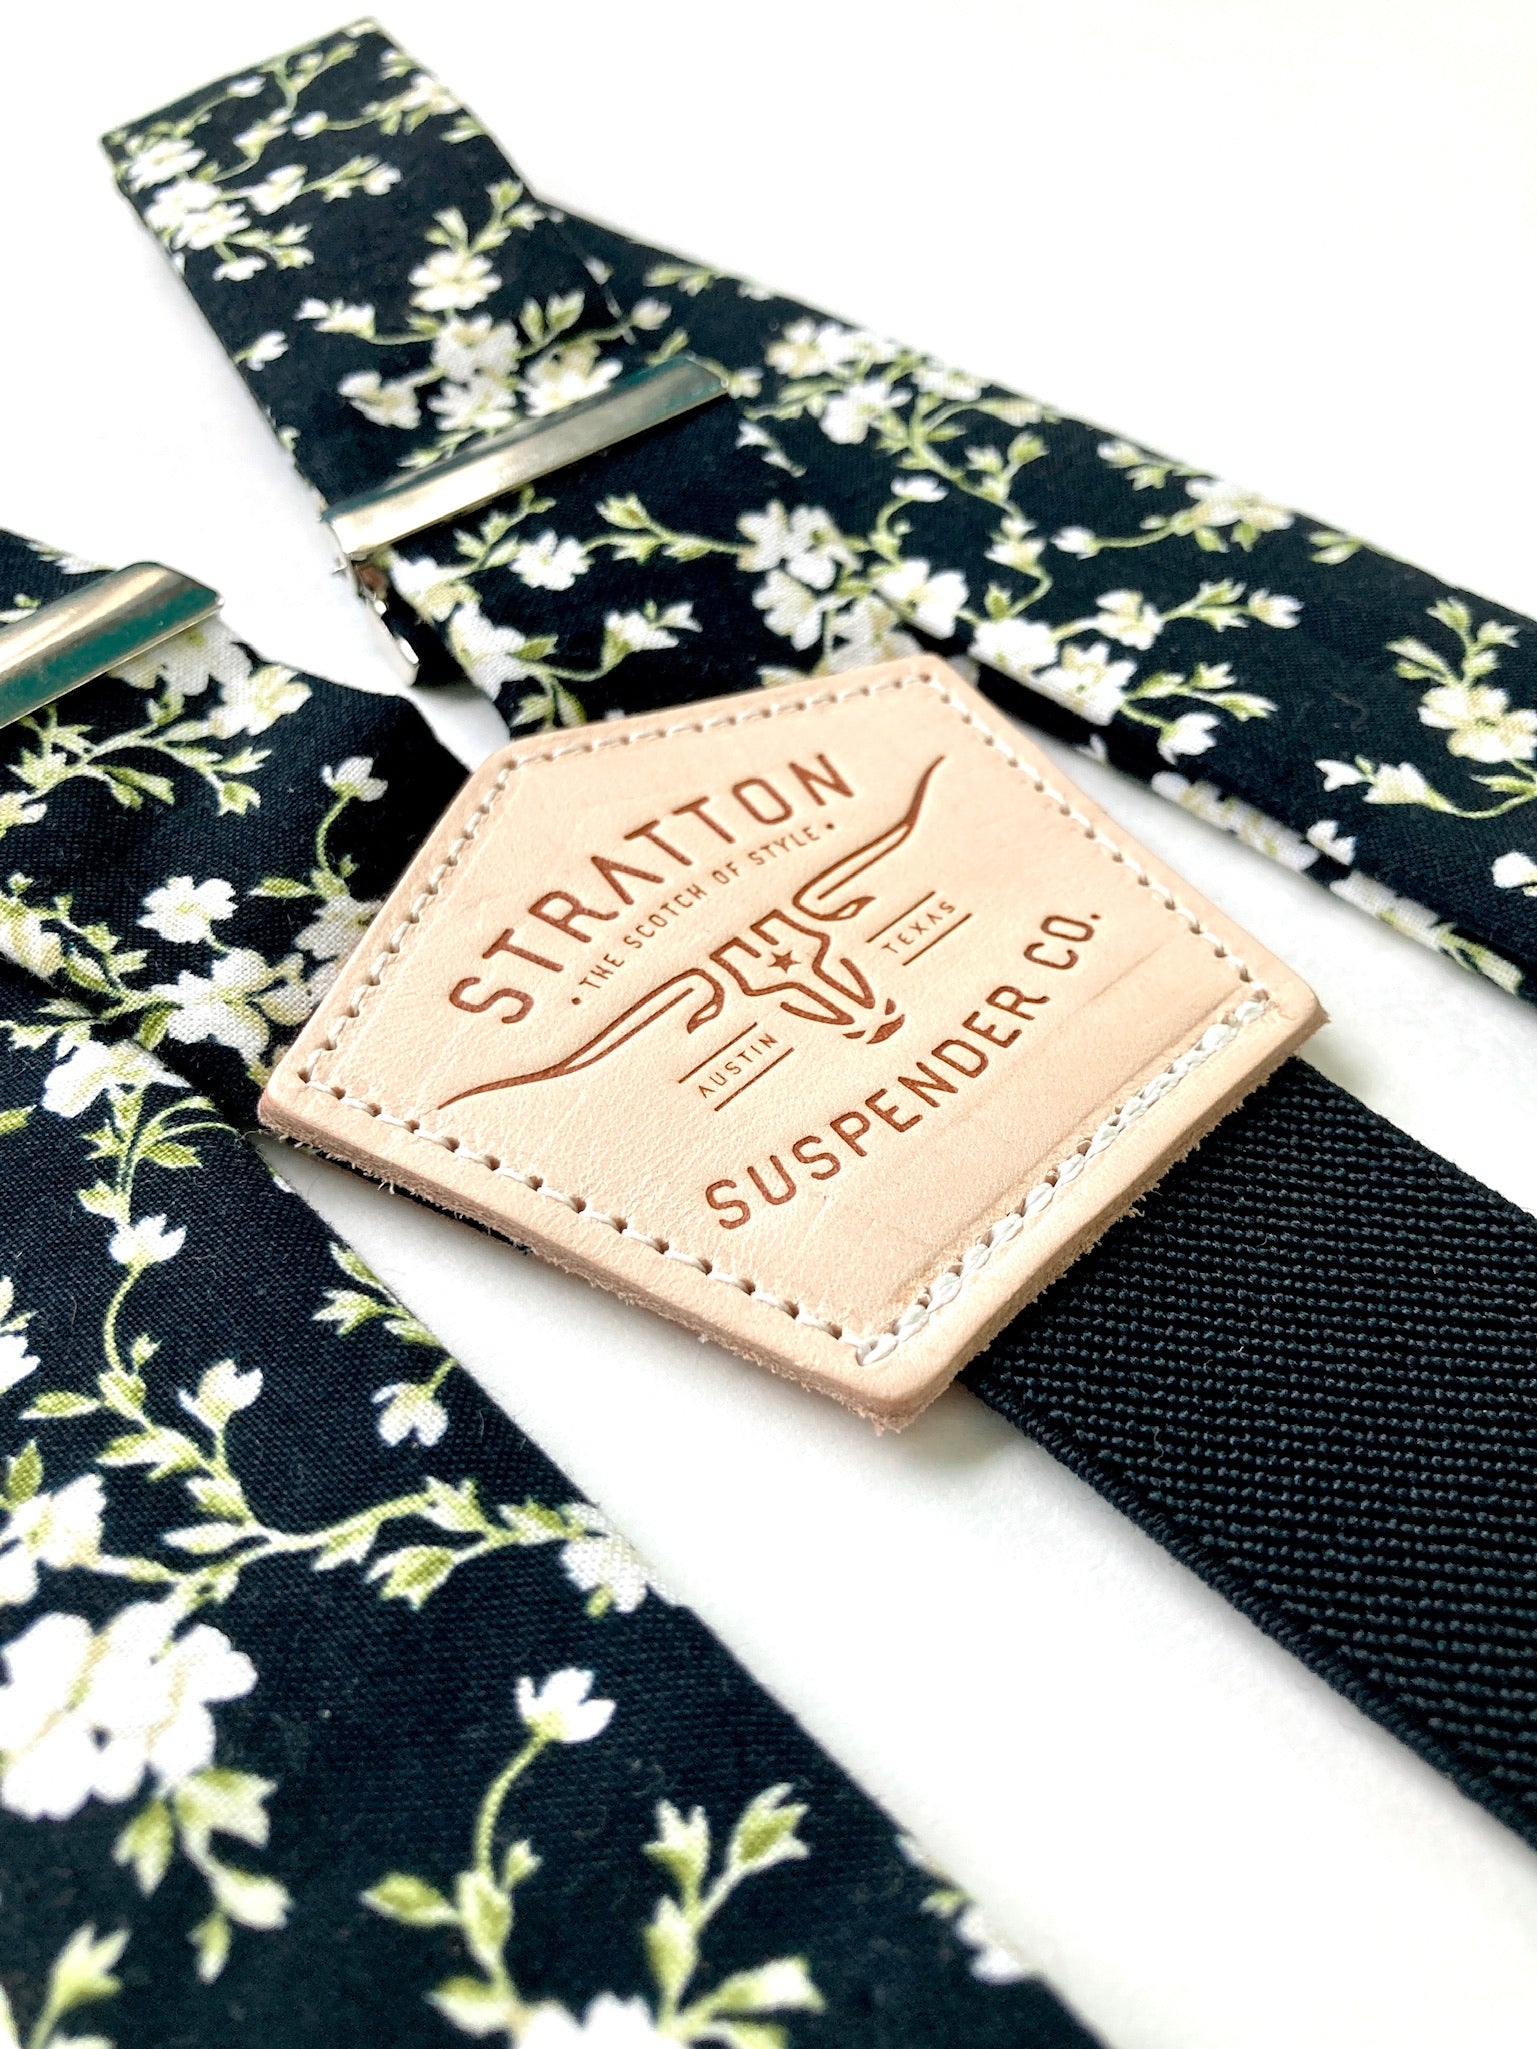 Black and White with Green Stem Floral Suspenders Paired with Black Elastic